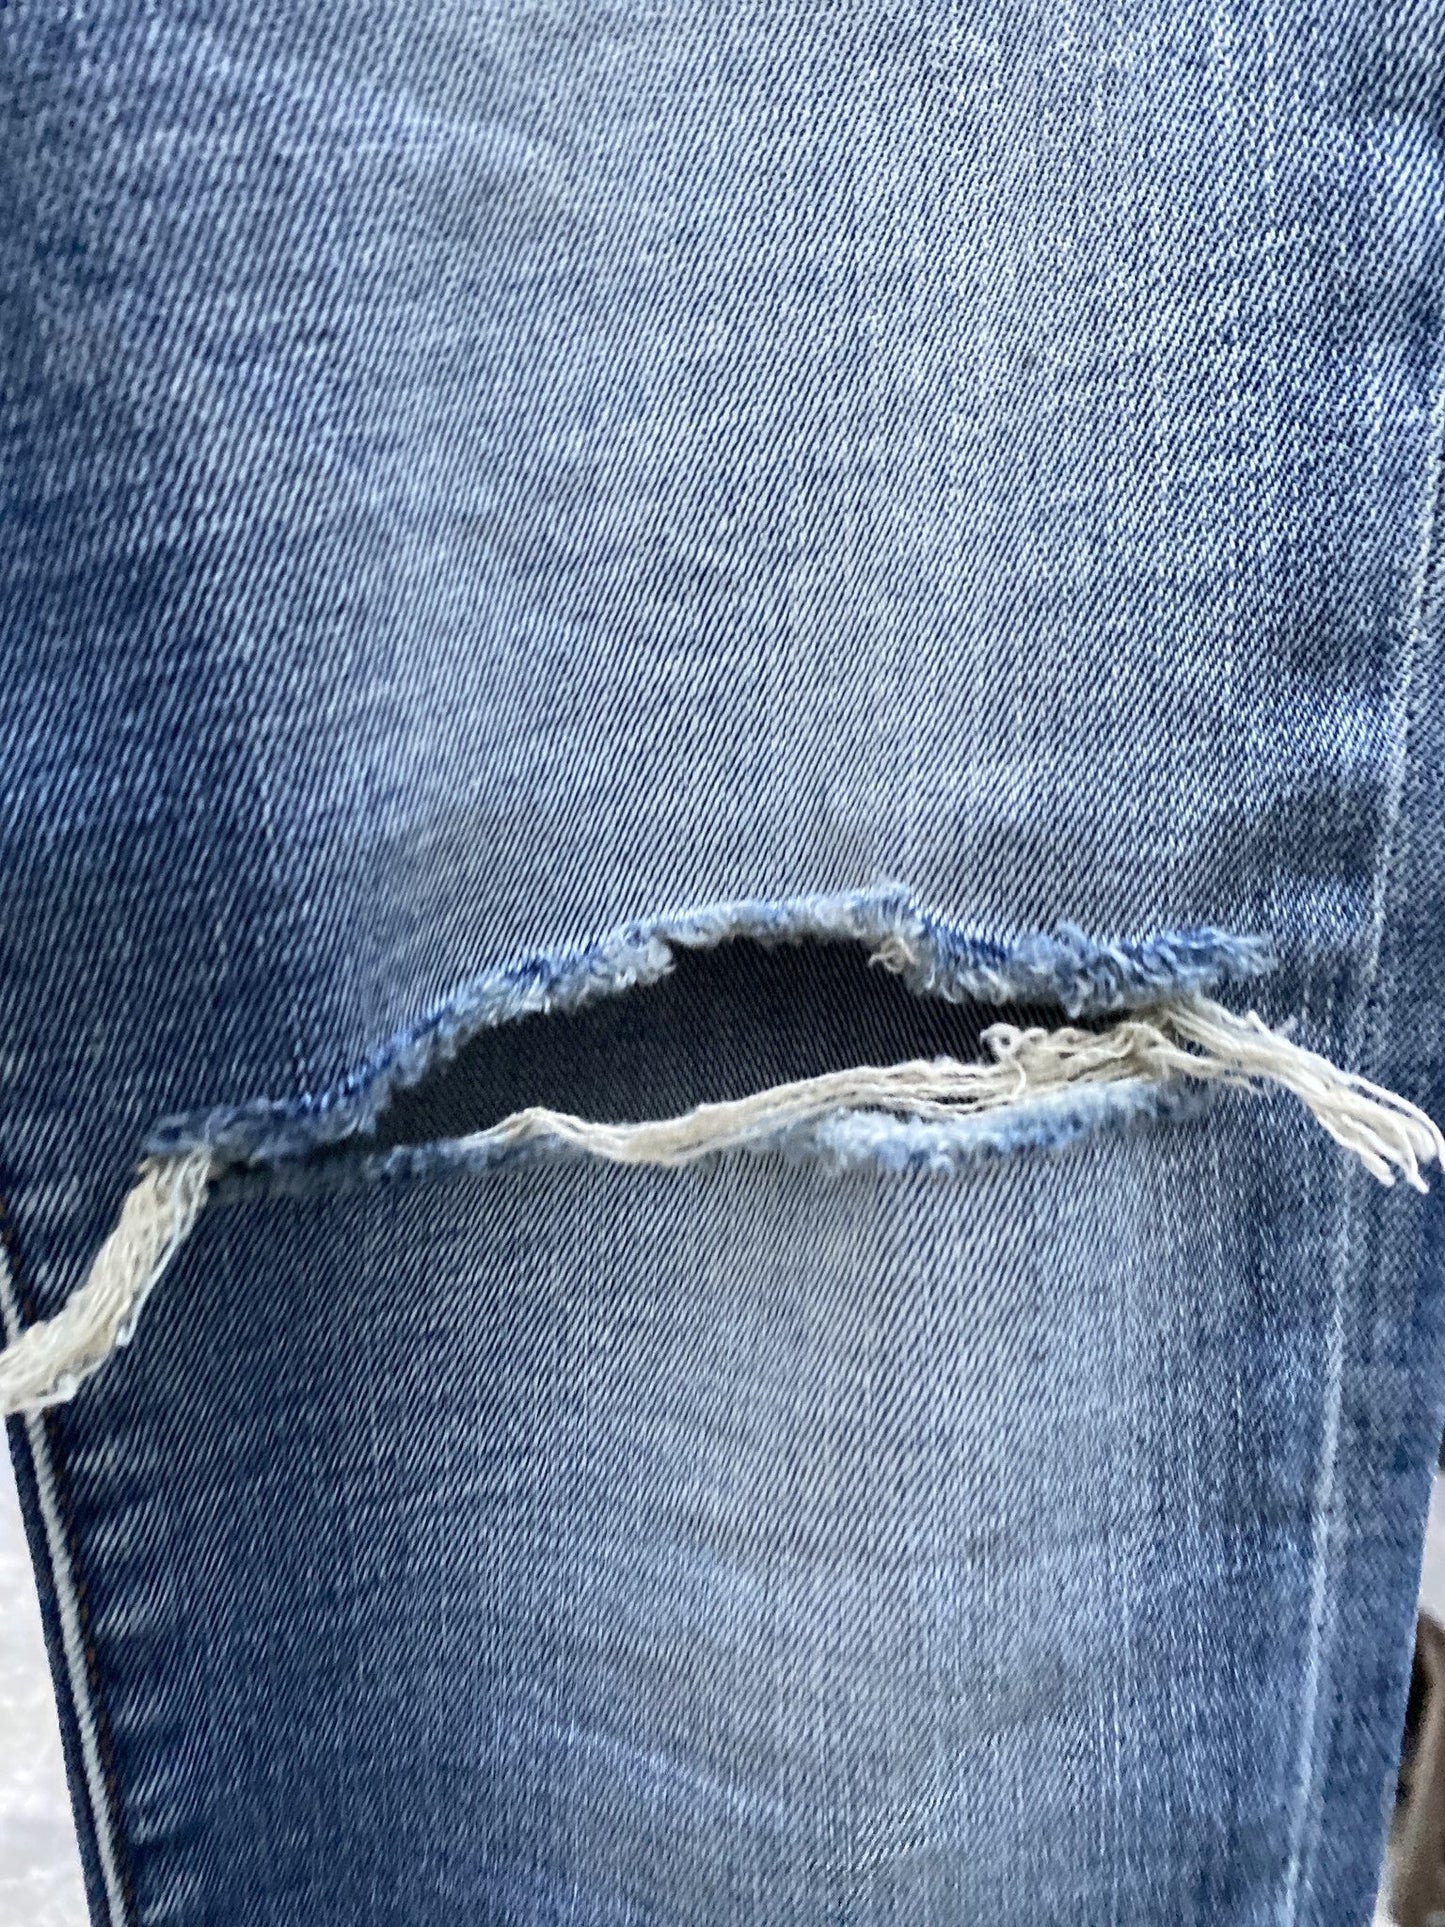 A close up of a pair of light blue DIESEL D-STRUKT 9C87 DENIM ripped jeans with holes in them.